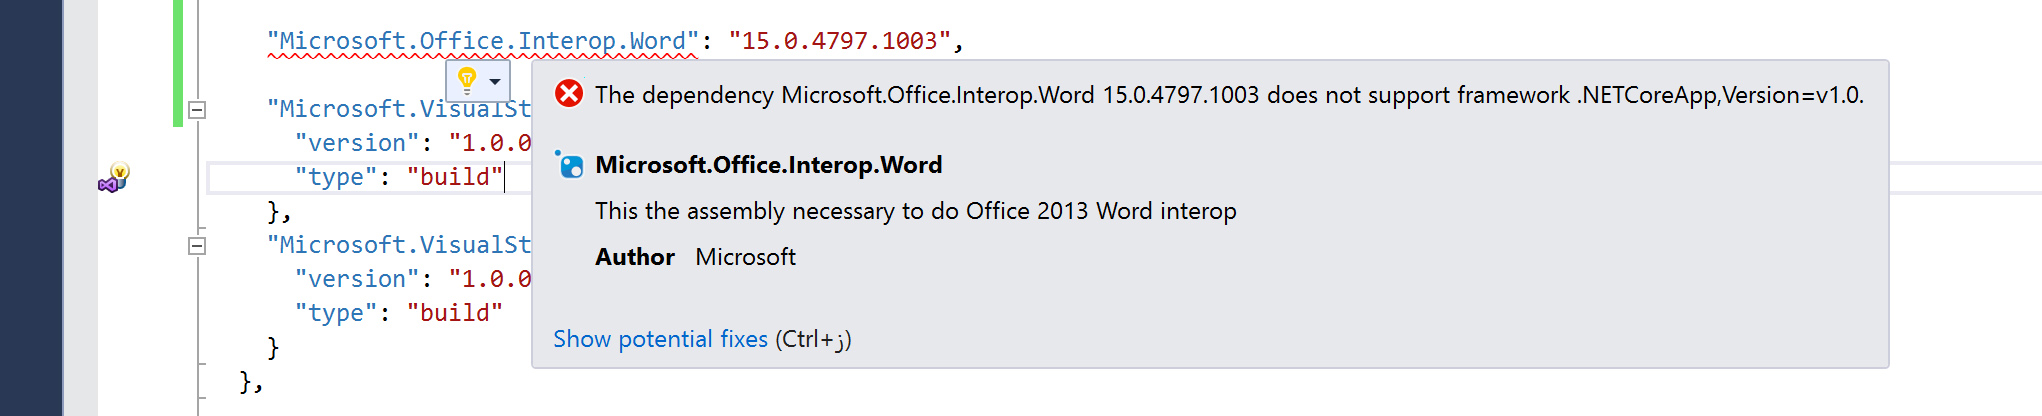 Microsoft.office.interop.word.application example